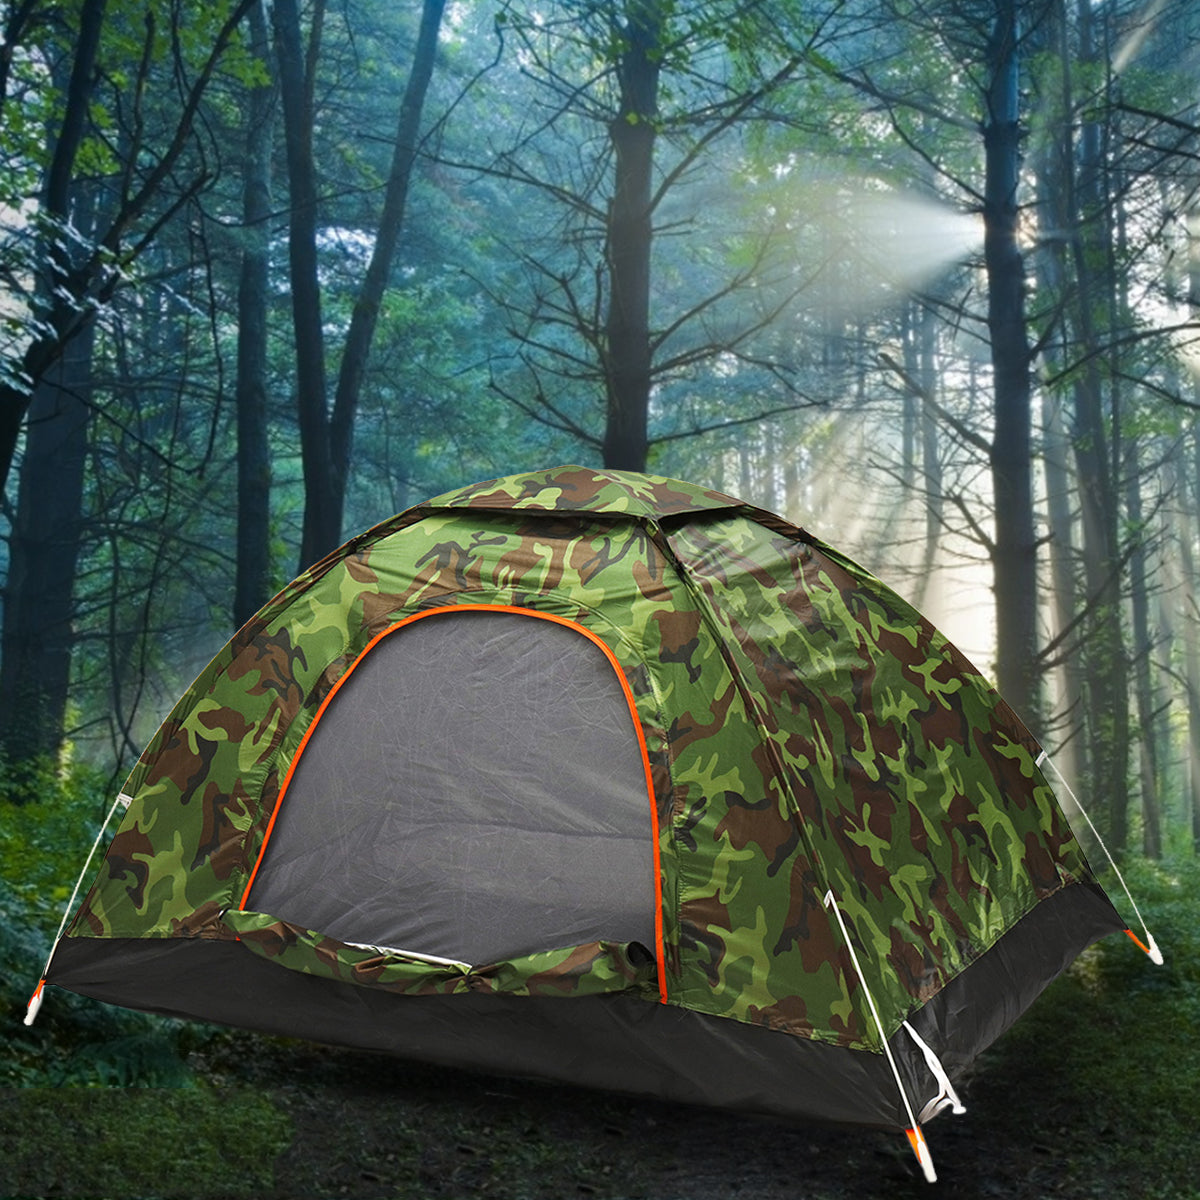 1-2 Person Automatic Camping Tent Waterproof Quick Shelter Sunshade Canopy Outdoor Travel Hiking